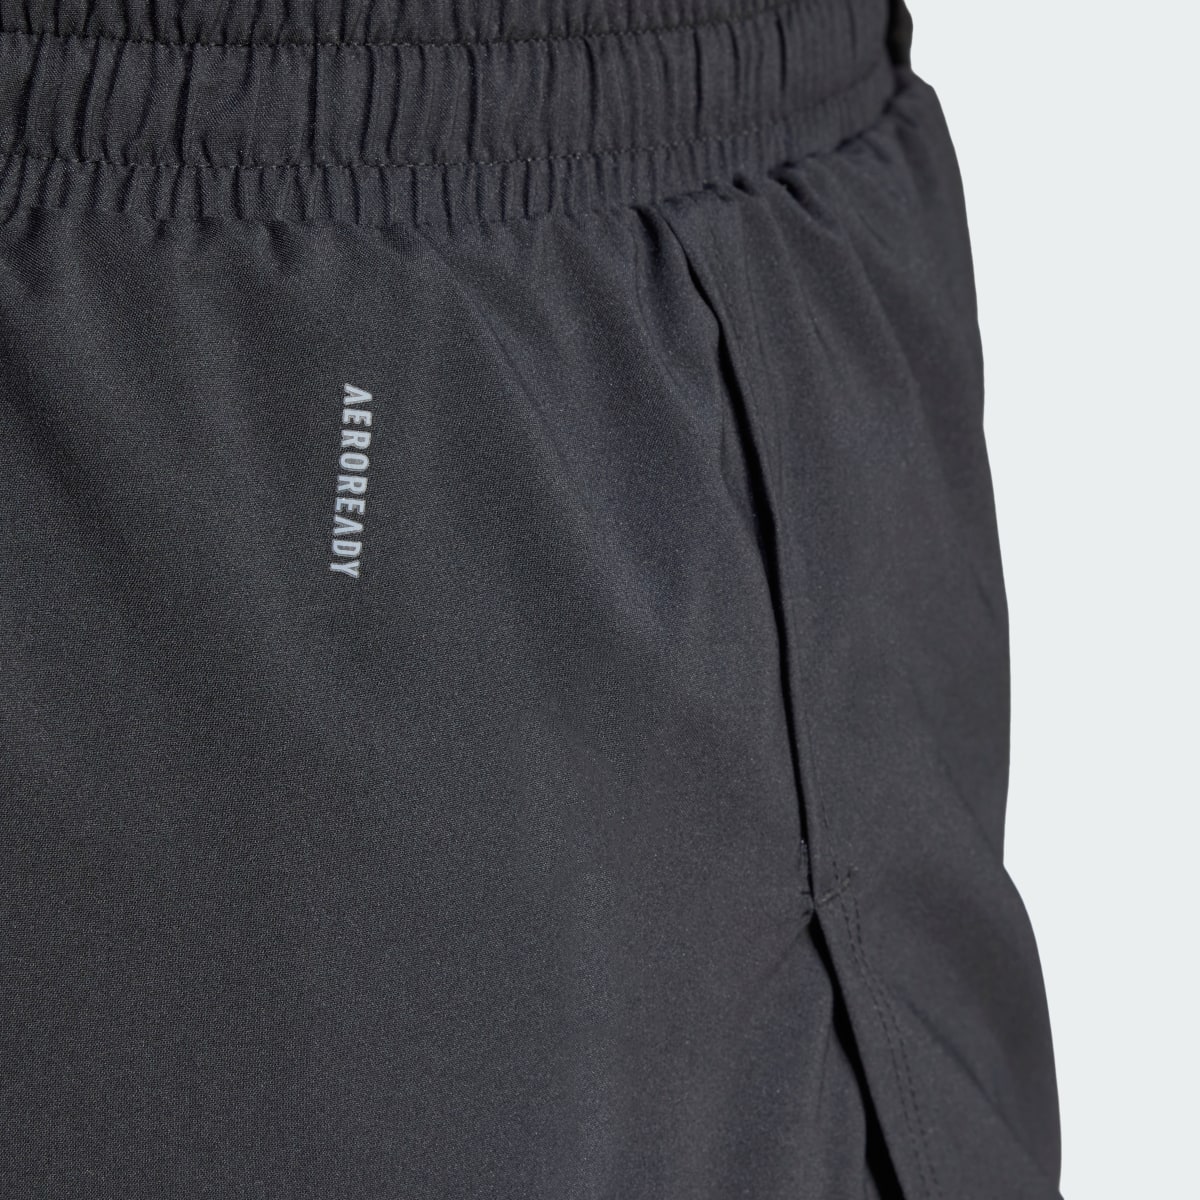 Adidas Designed for Training 2-in-1 Shorts (Plus Size). 5